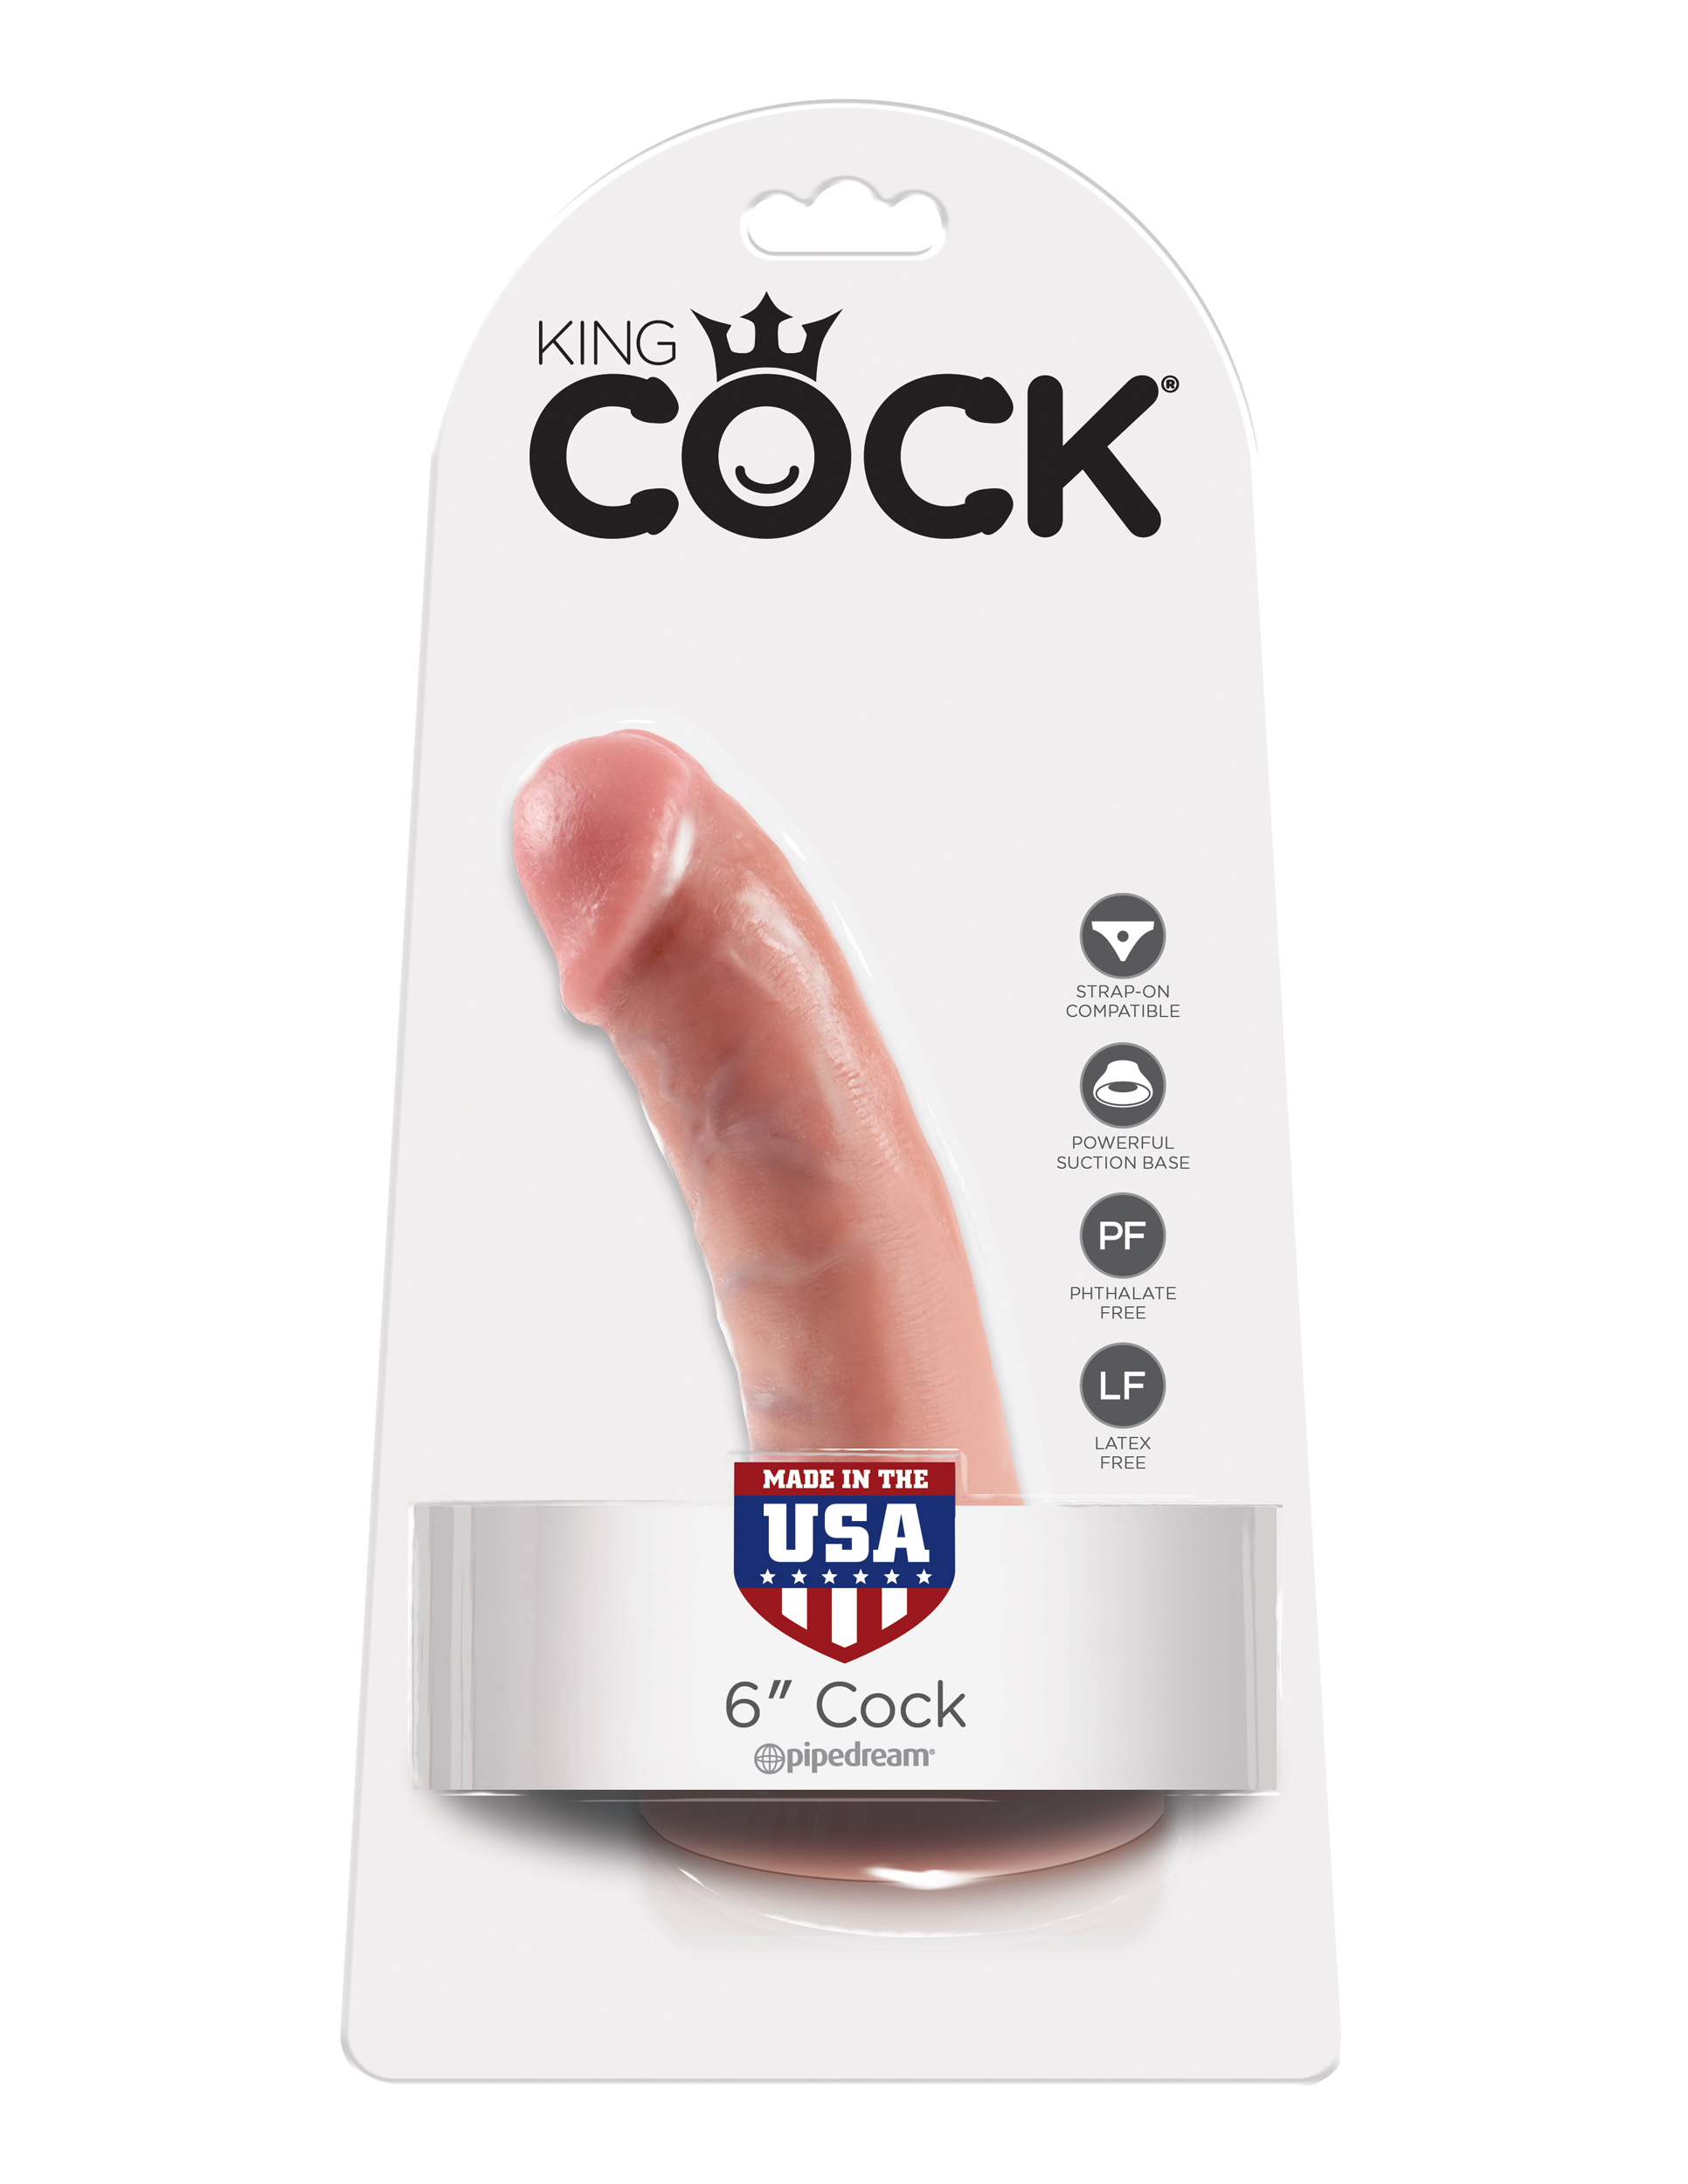    6 Cock